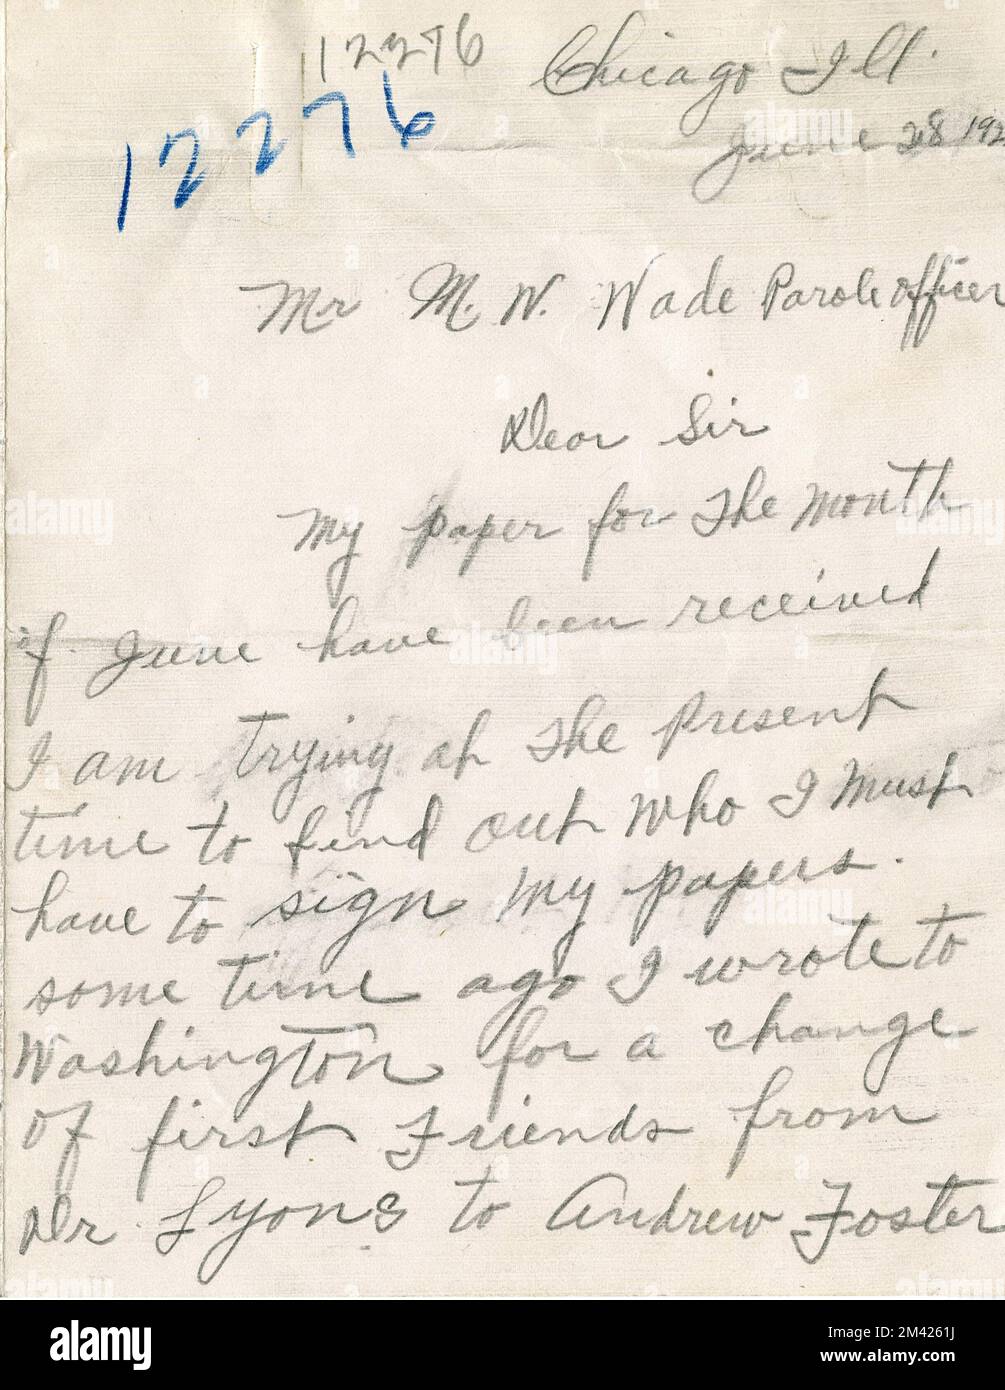 Letter Written by Roy Tyler to Parole Officer M. W. Wade Concerning Permission for Roy Tyler to play baseball, June 28, 192?.  Bureau of Prisons, Inmate case files. Stock Photo